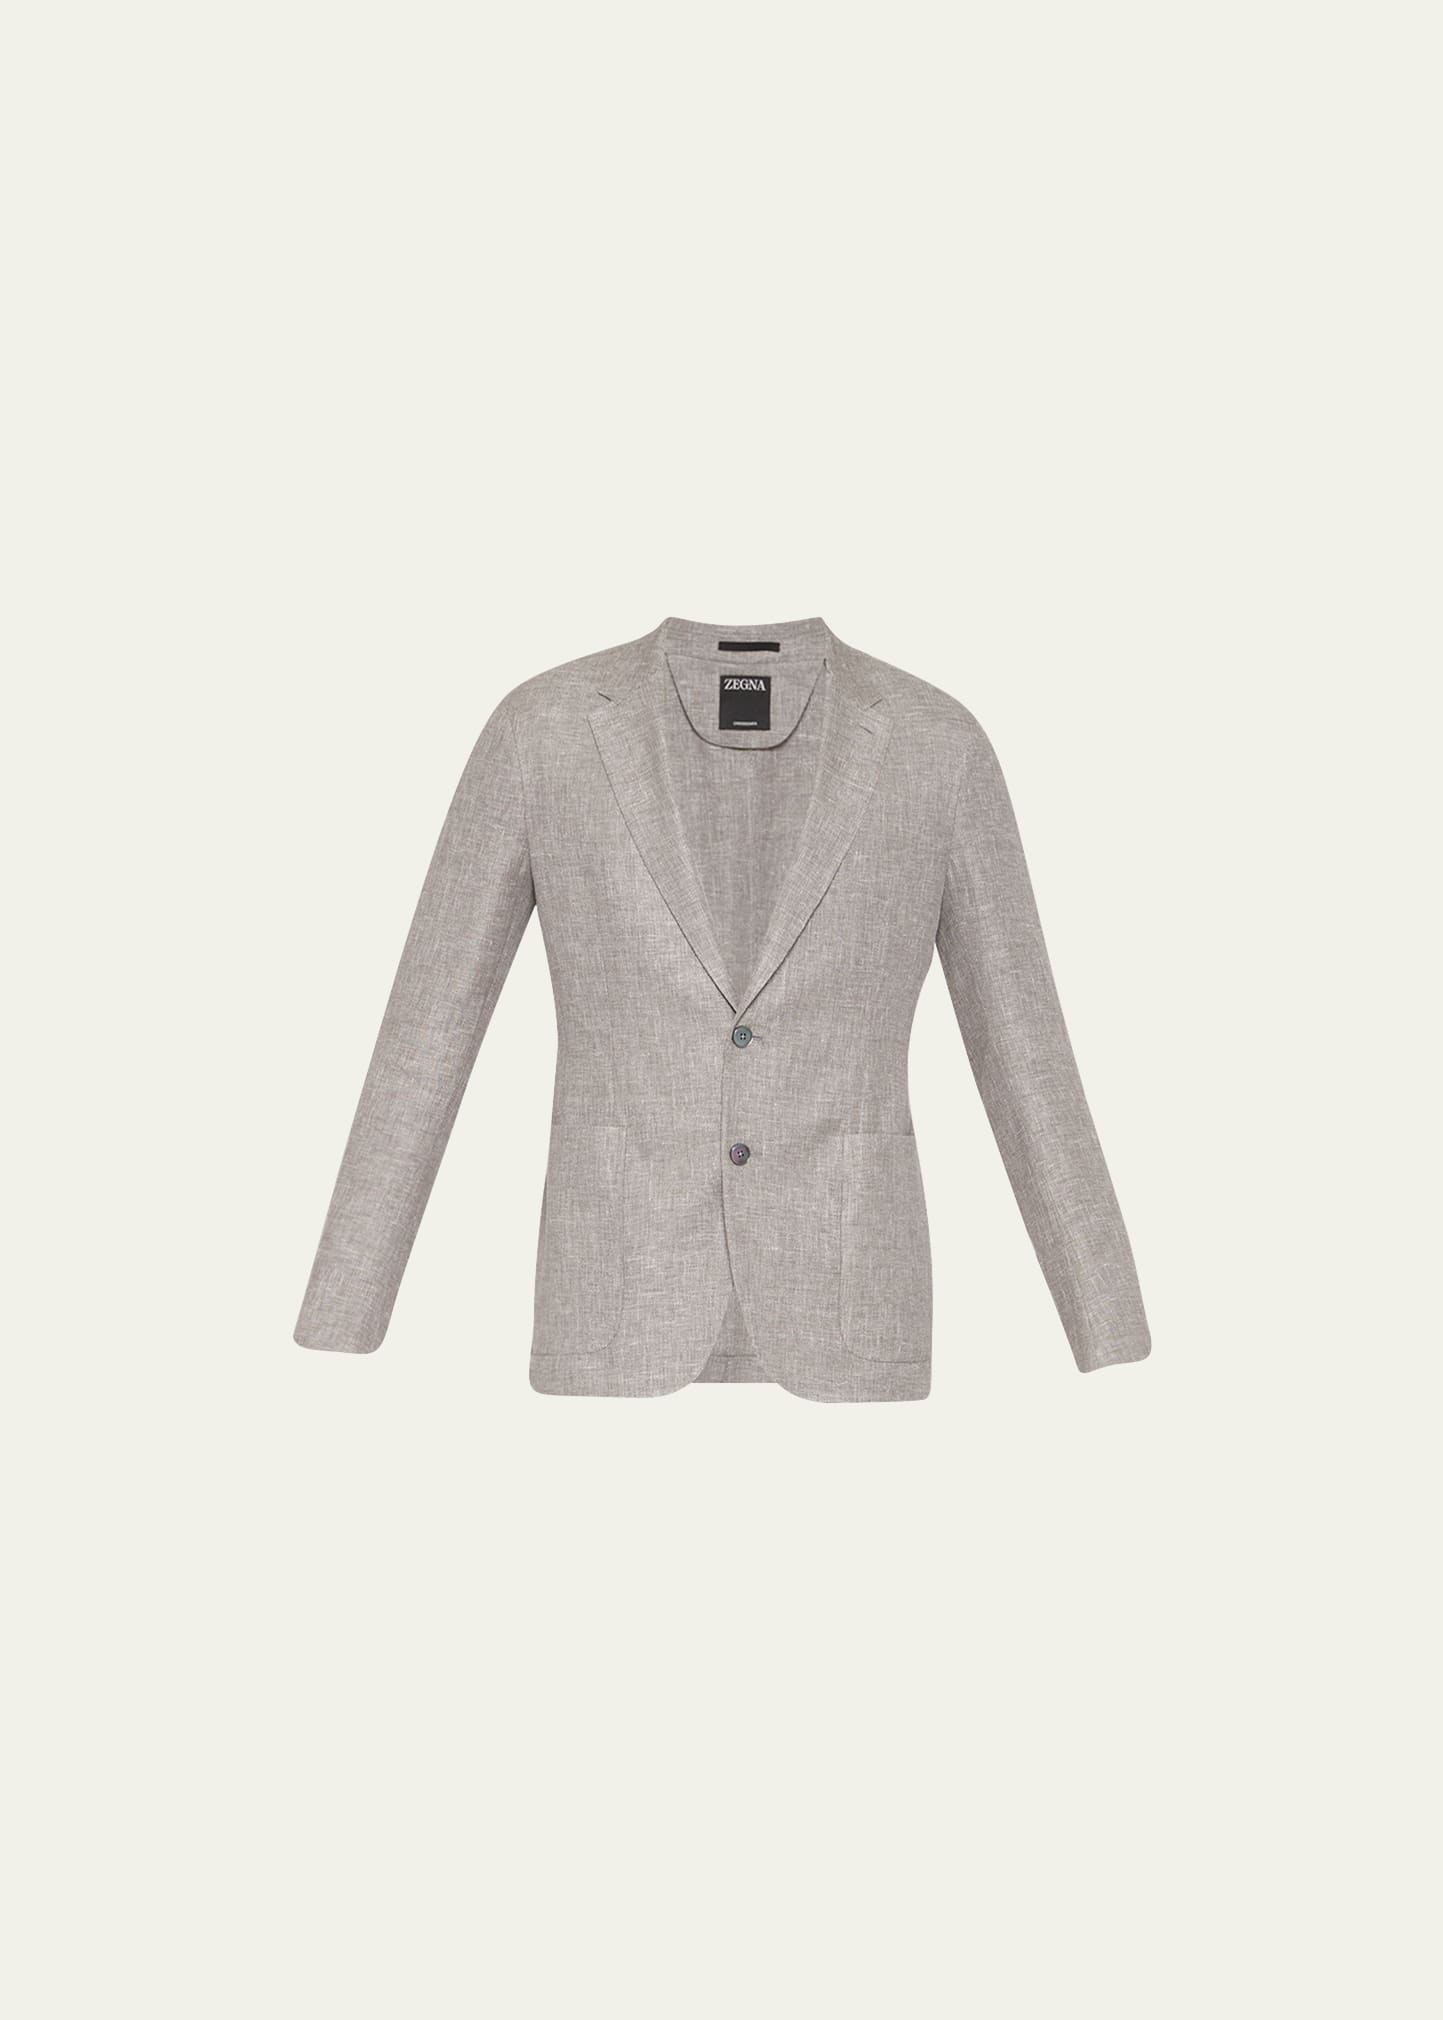 Zegna Men's Freeway Textured Crossover Sport Jacket In Silv Sld